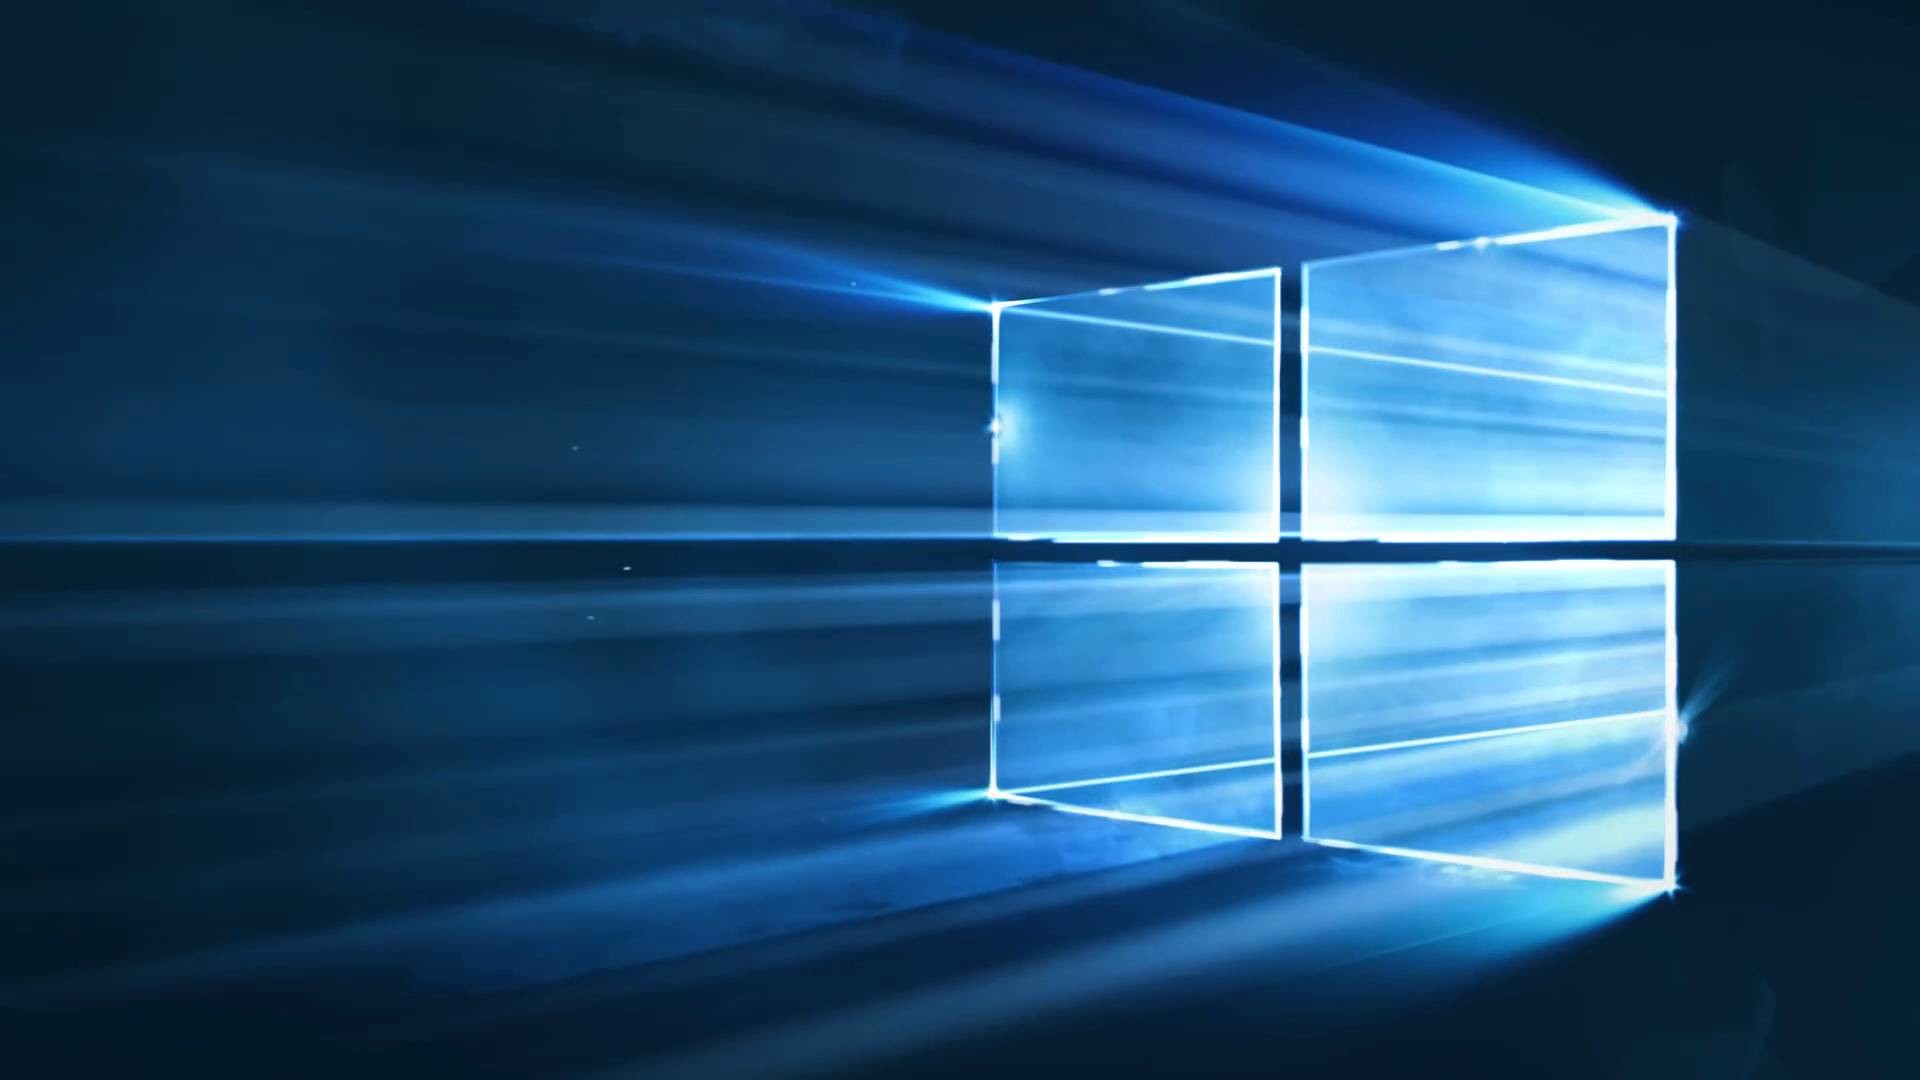 Animated Wallpaper For Windows 10